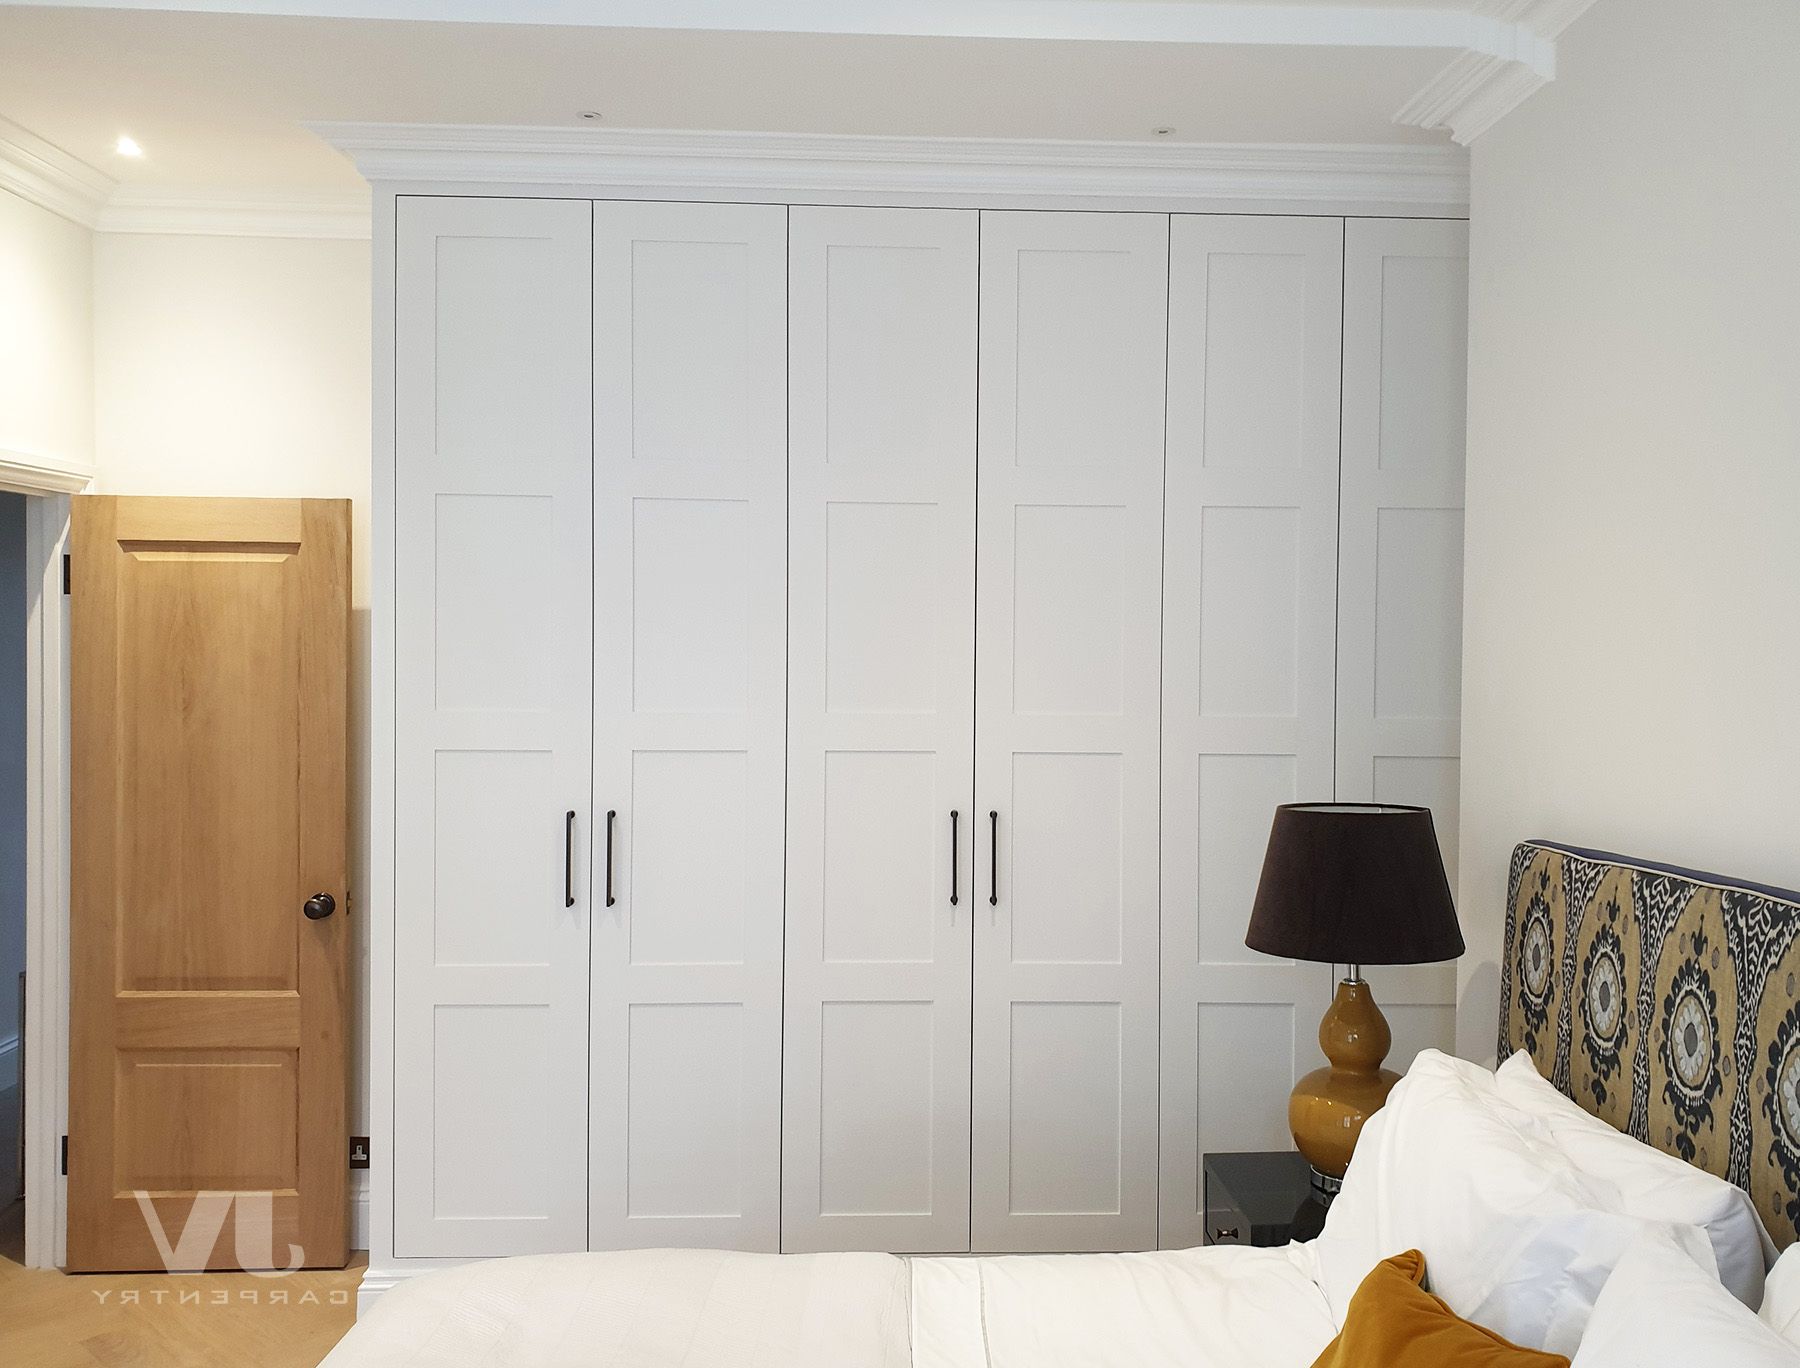 Fitted Wardrobes | Bespoke Bedroom Furniture | Jv Carpentry Intended For Built In Wardrobes (View 7 of 20)